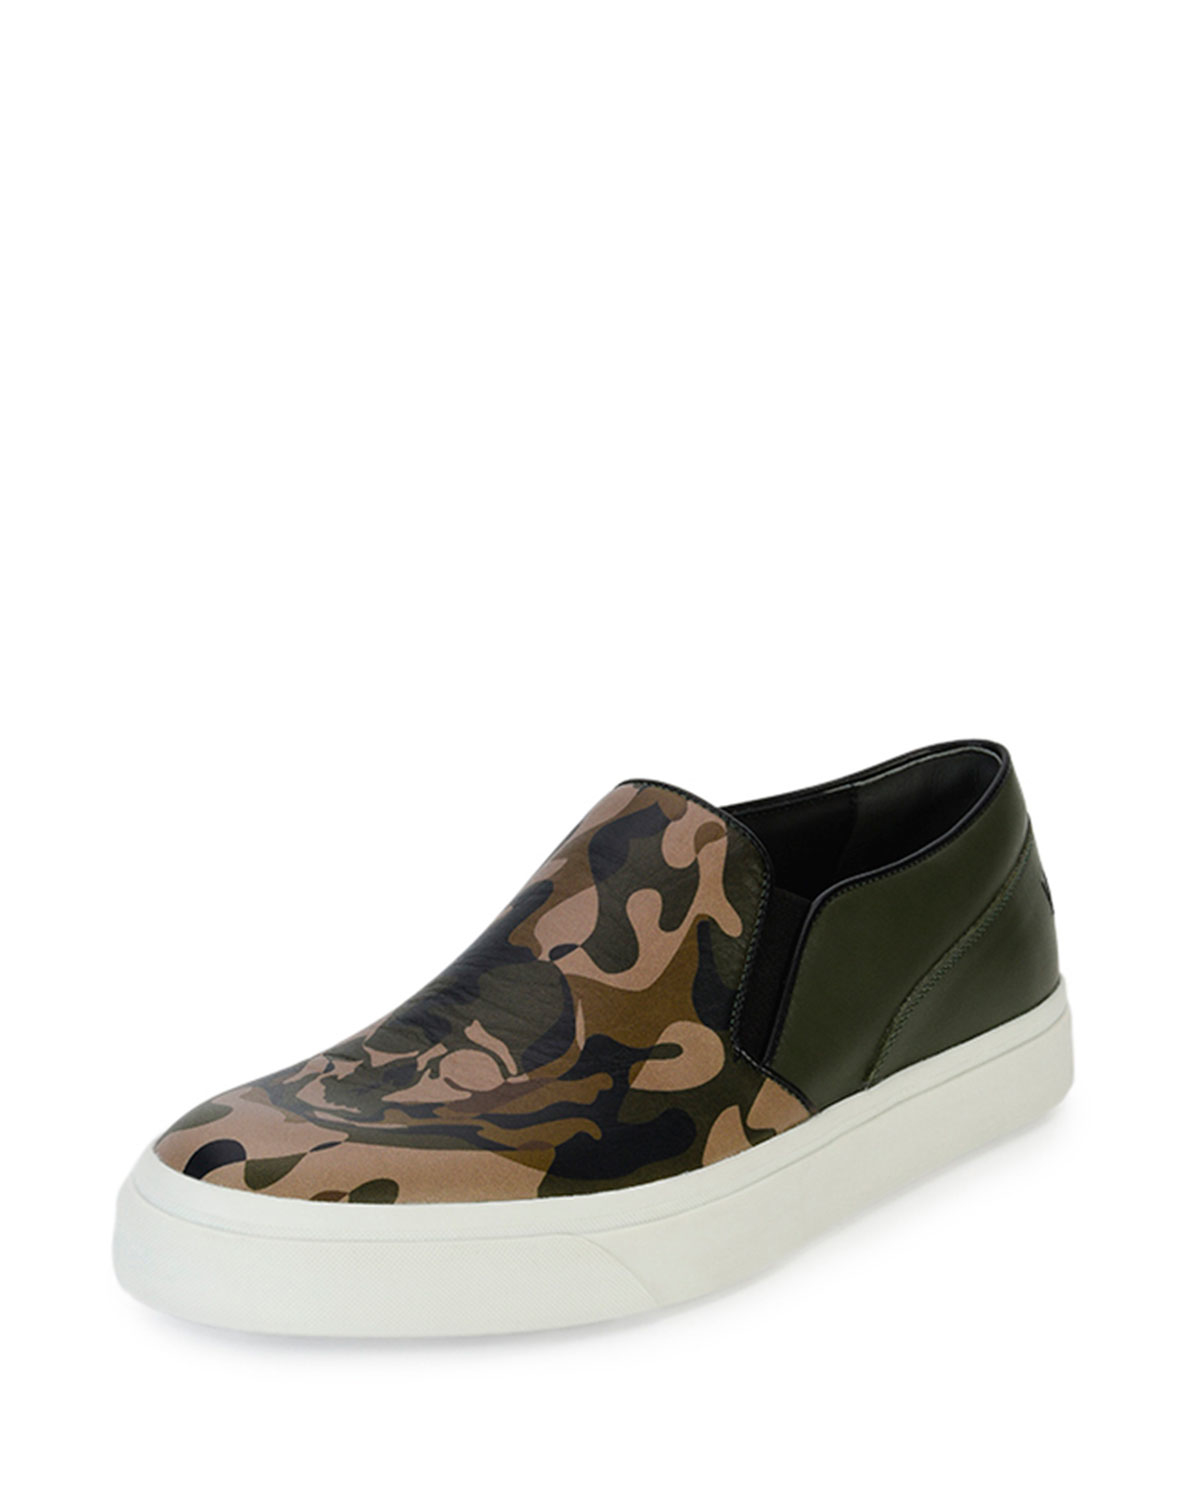 Alexander McQueen Leather Camo-print Slip-on Skate Shoe With Skull in ...